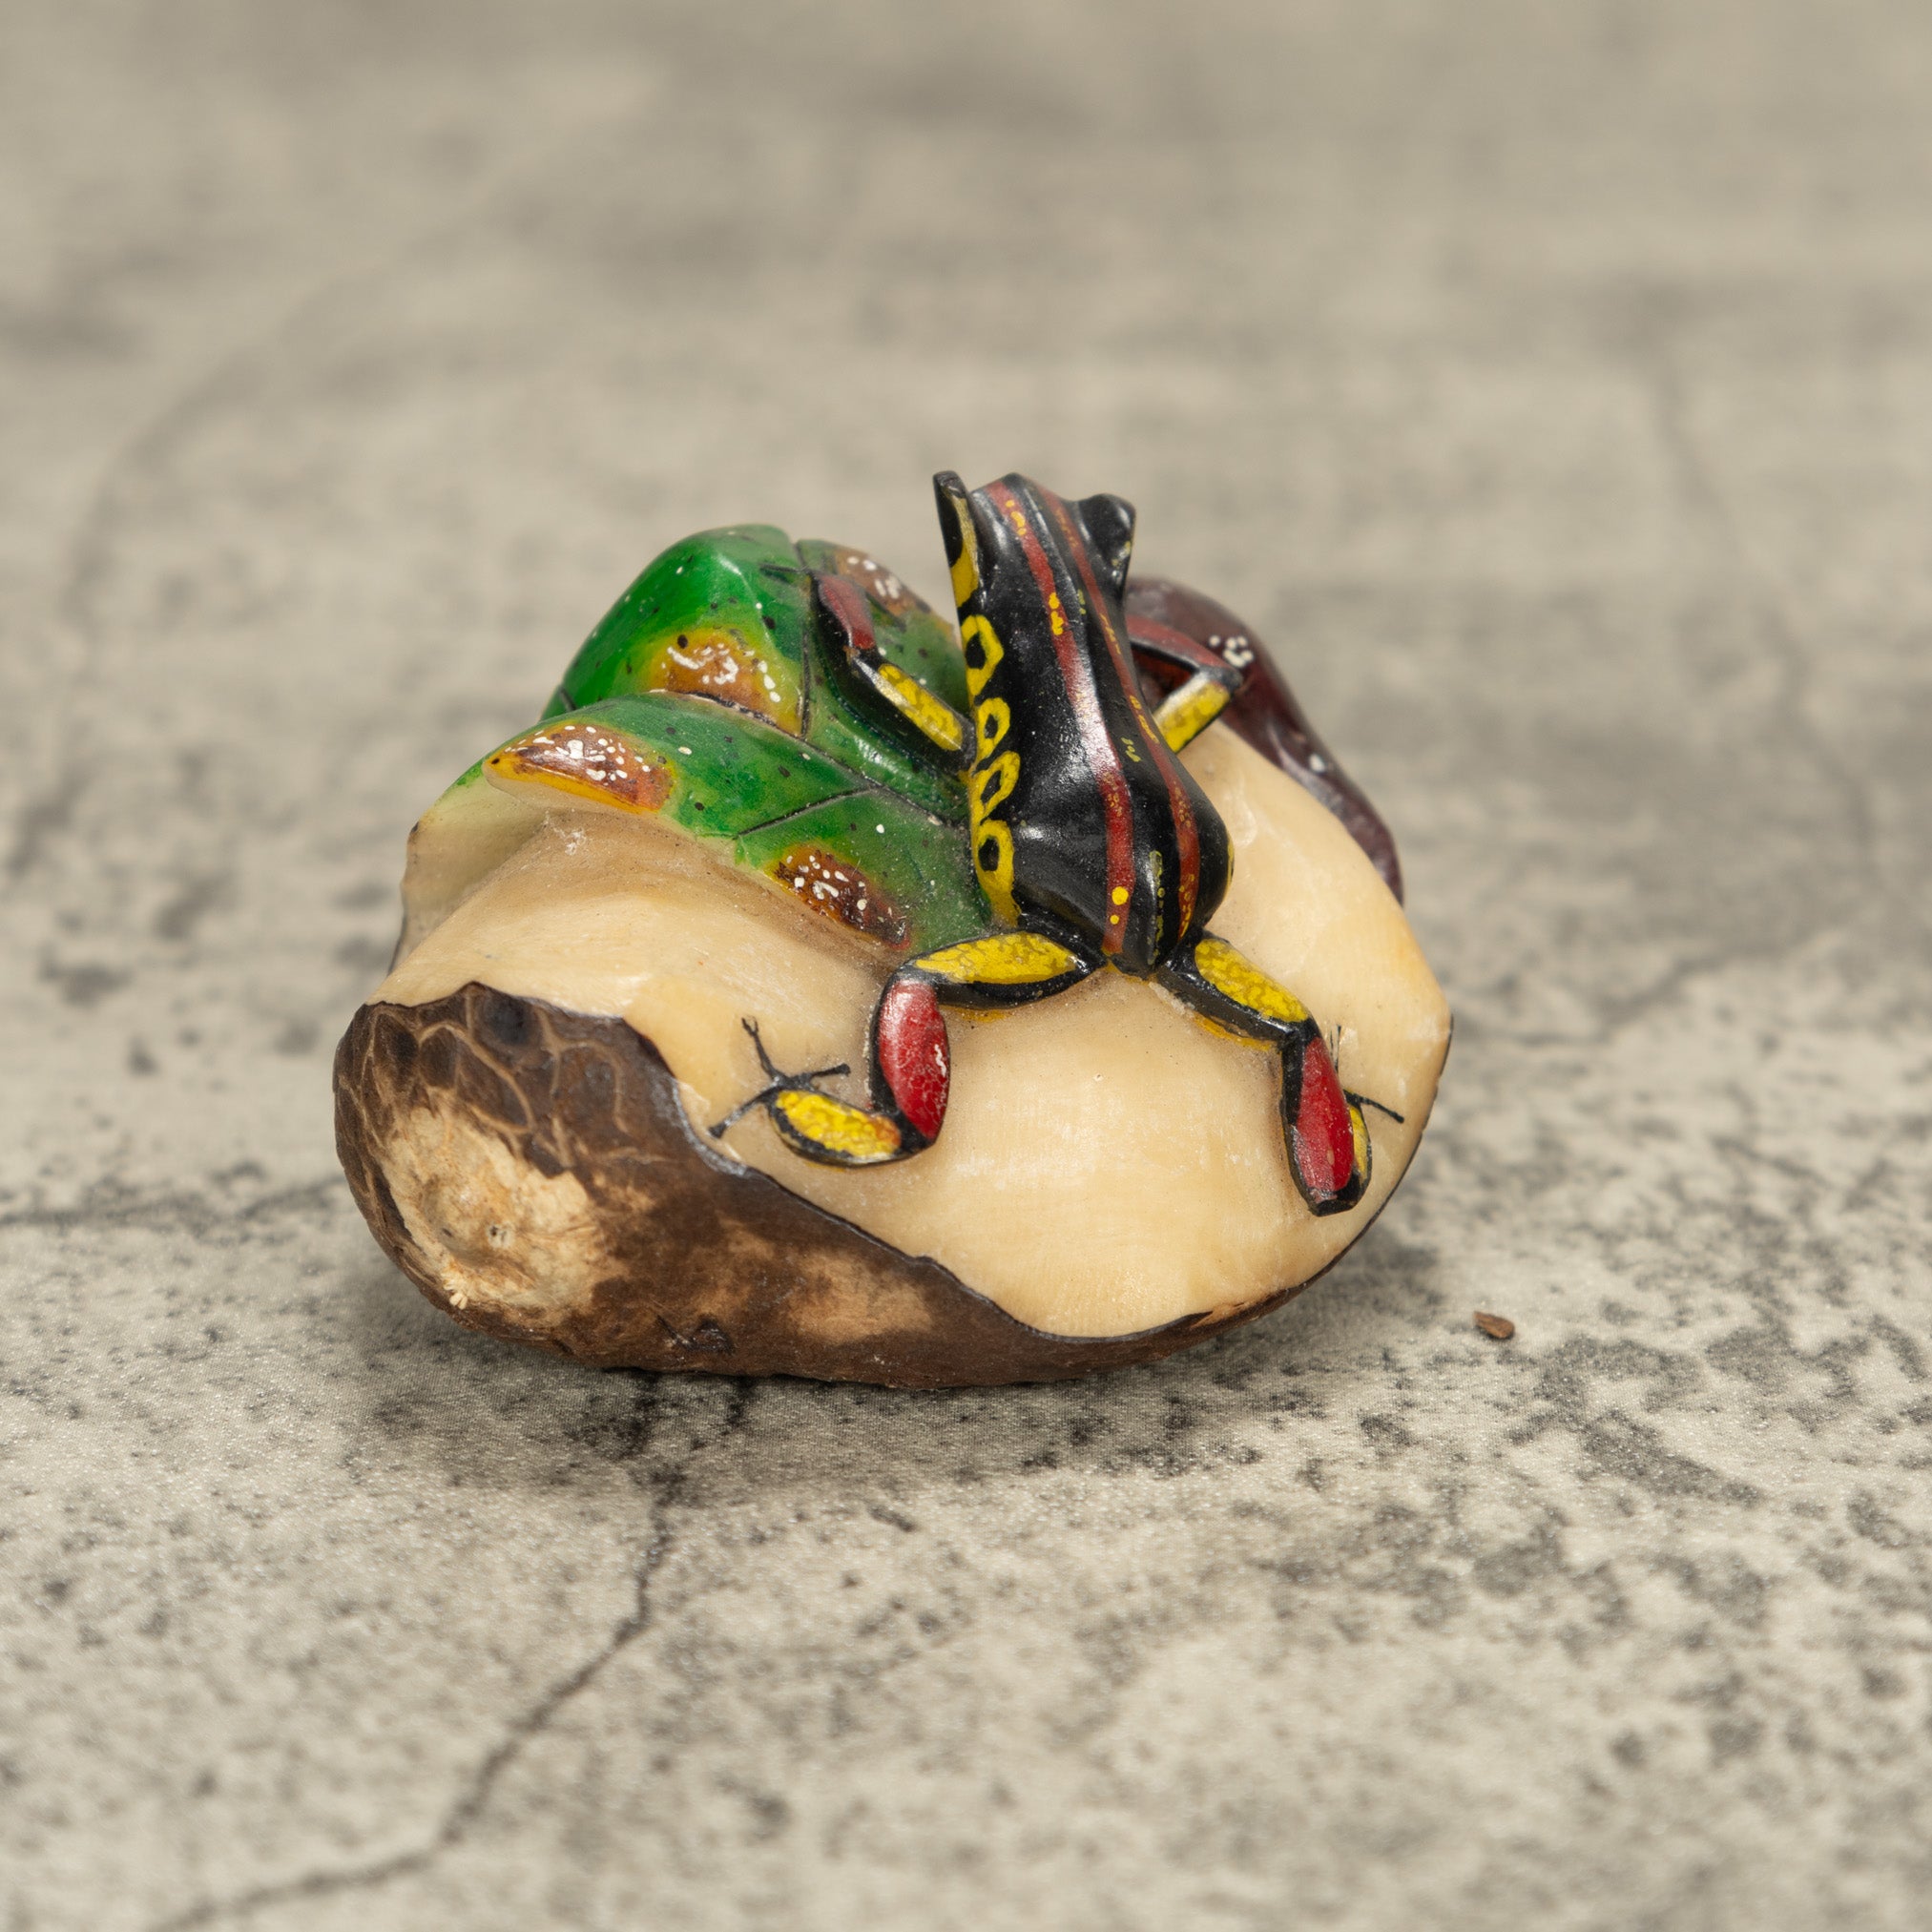 Poison Dart Frog With Leaf Tagua Nut Carving